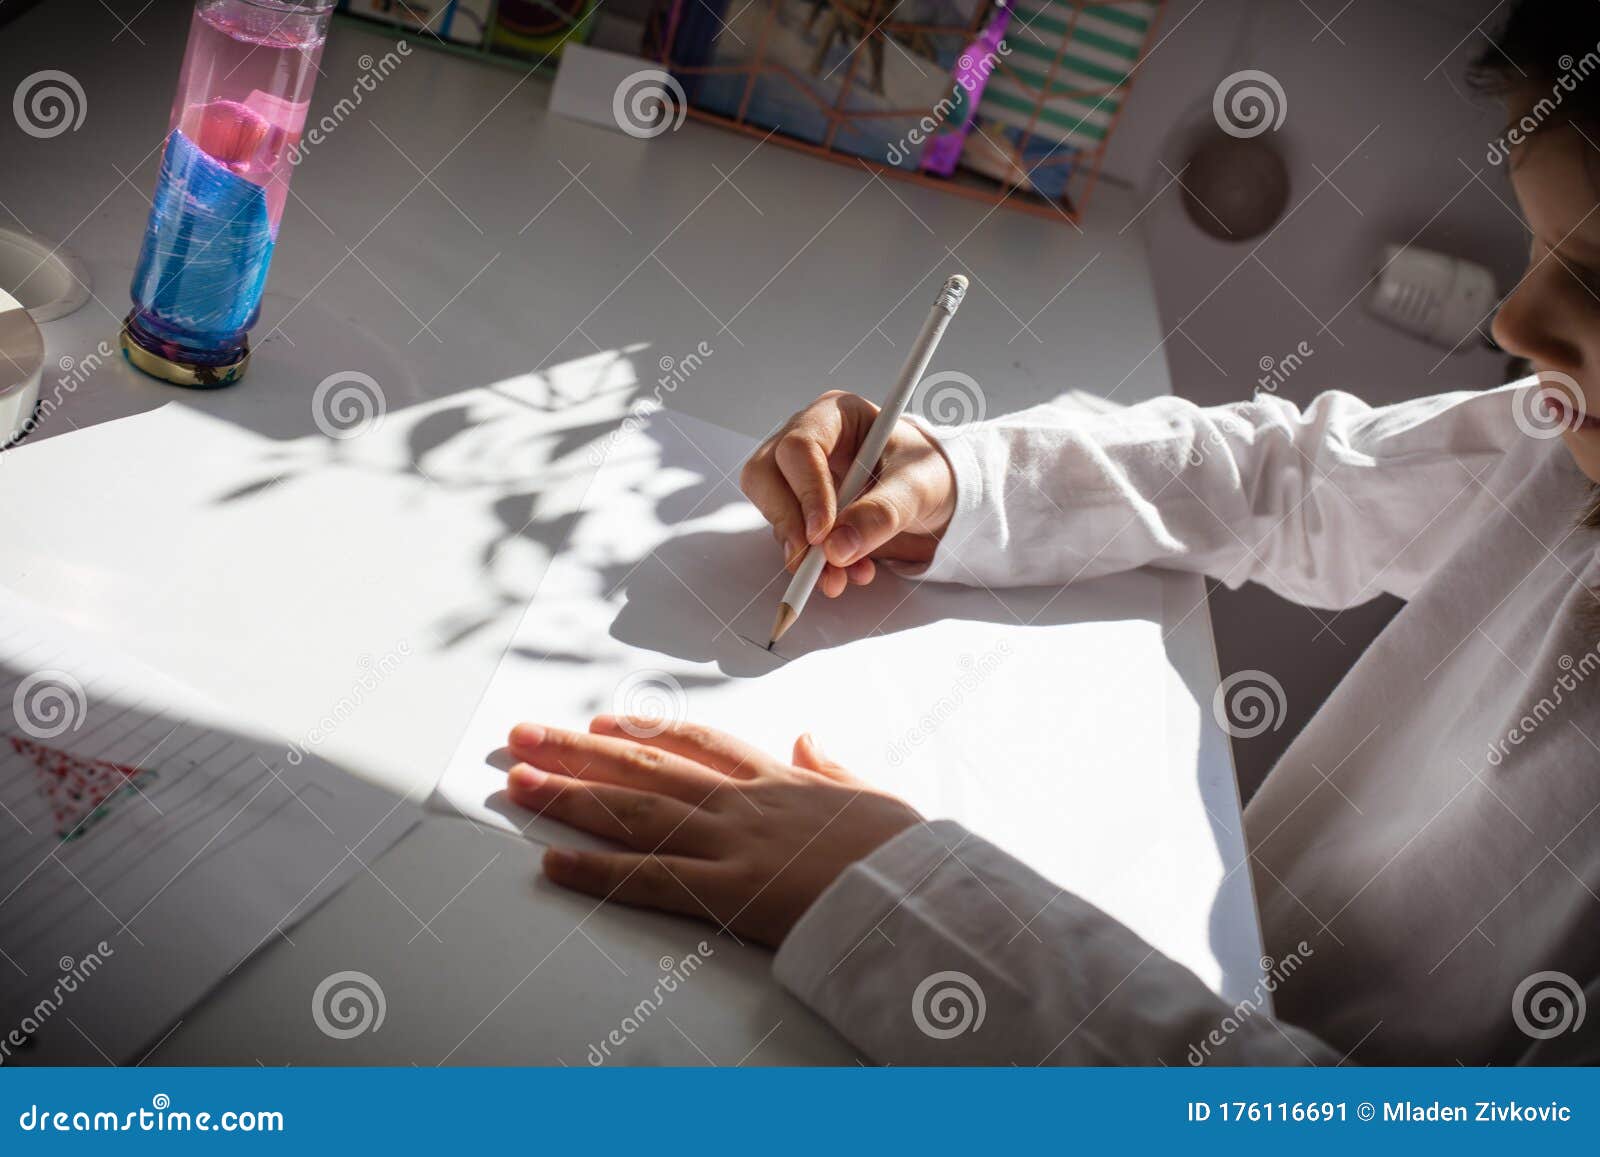 She is Focused on Her Learning Stock Image - Image of person, children ...